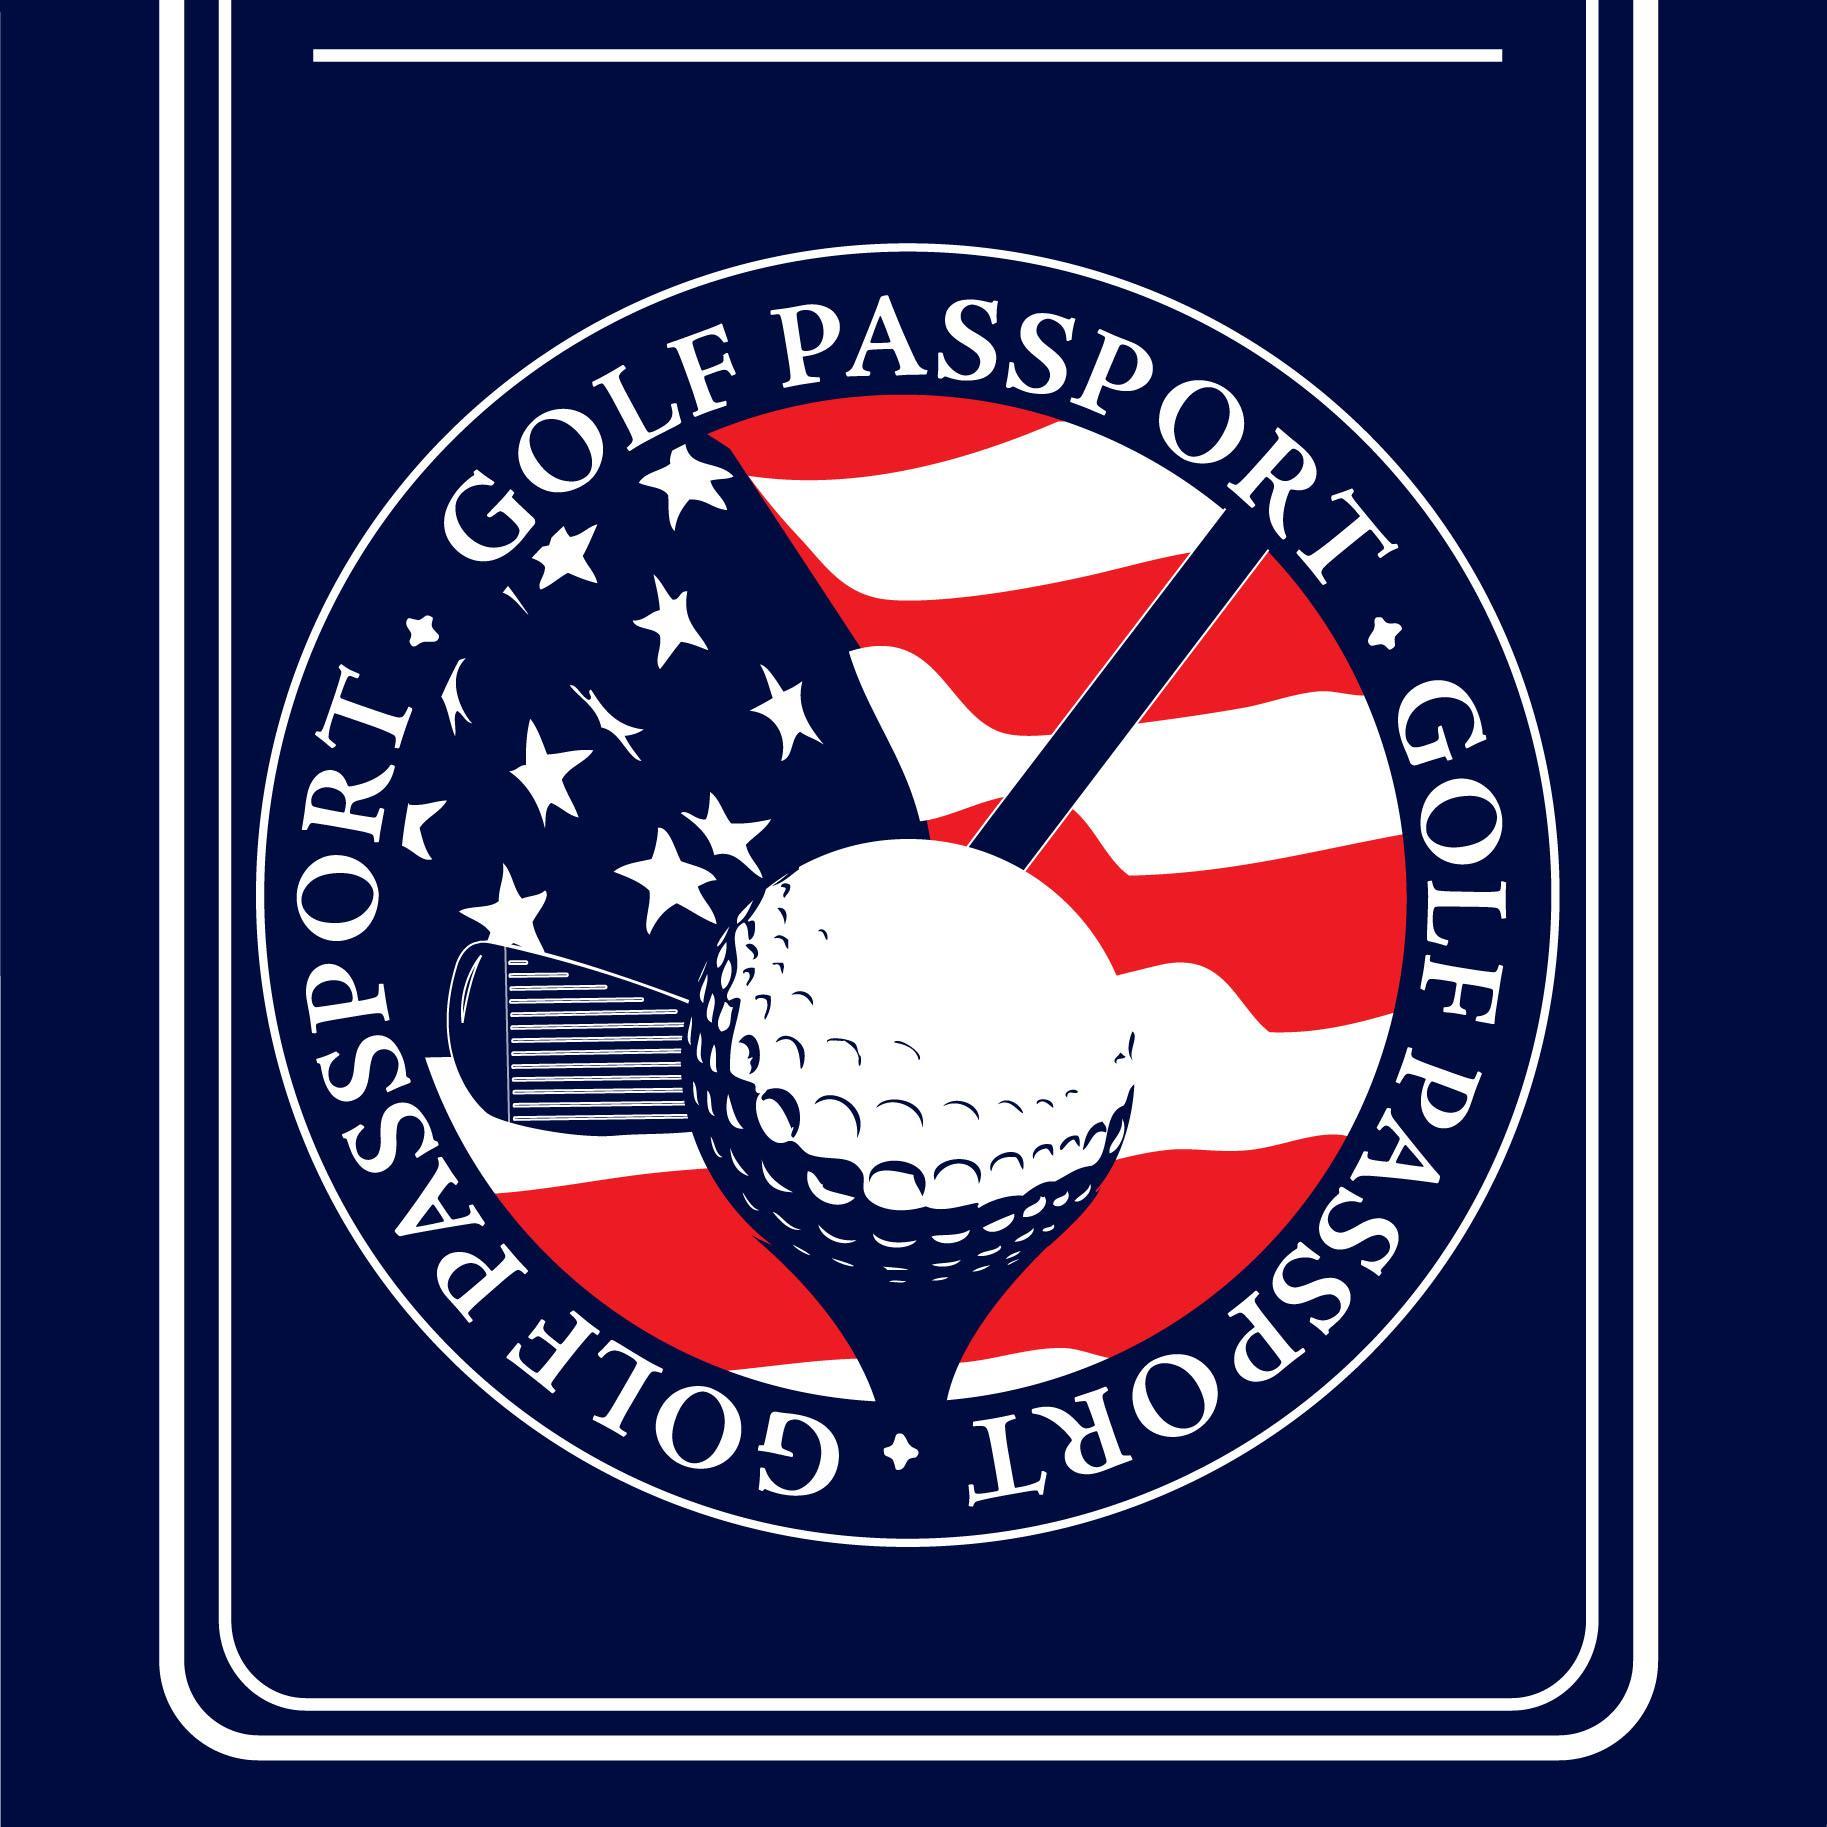 The Golf Passport gives members an opportunity to play over 300 golf courses in OK, AR, KS, MO, IL and TX at discounts. We help plan golf tournaments too.